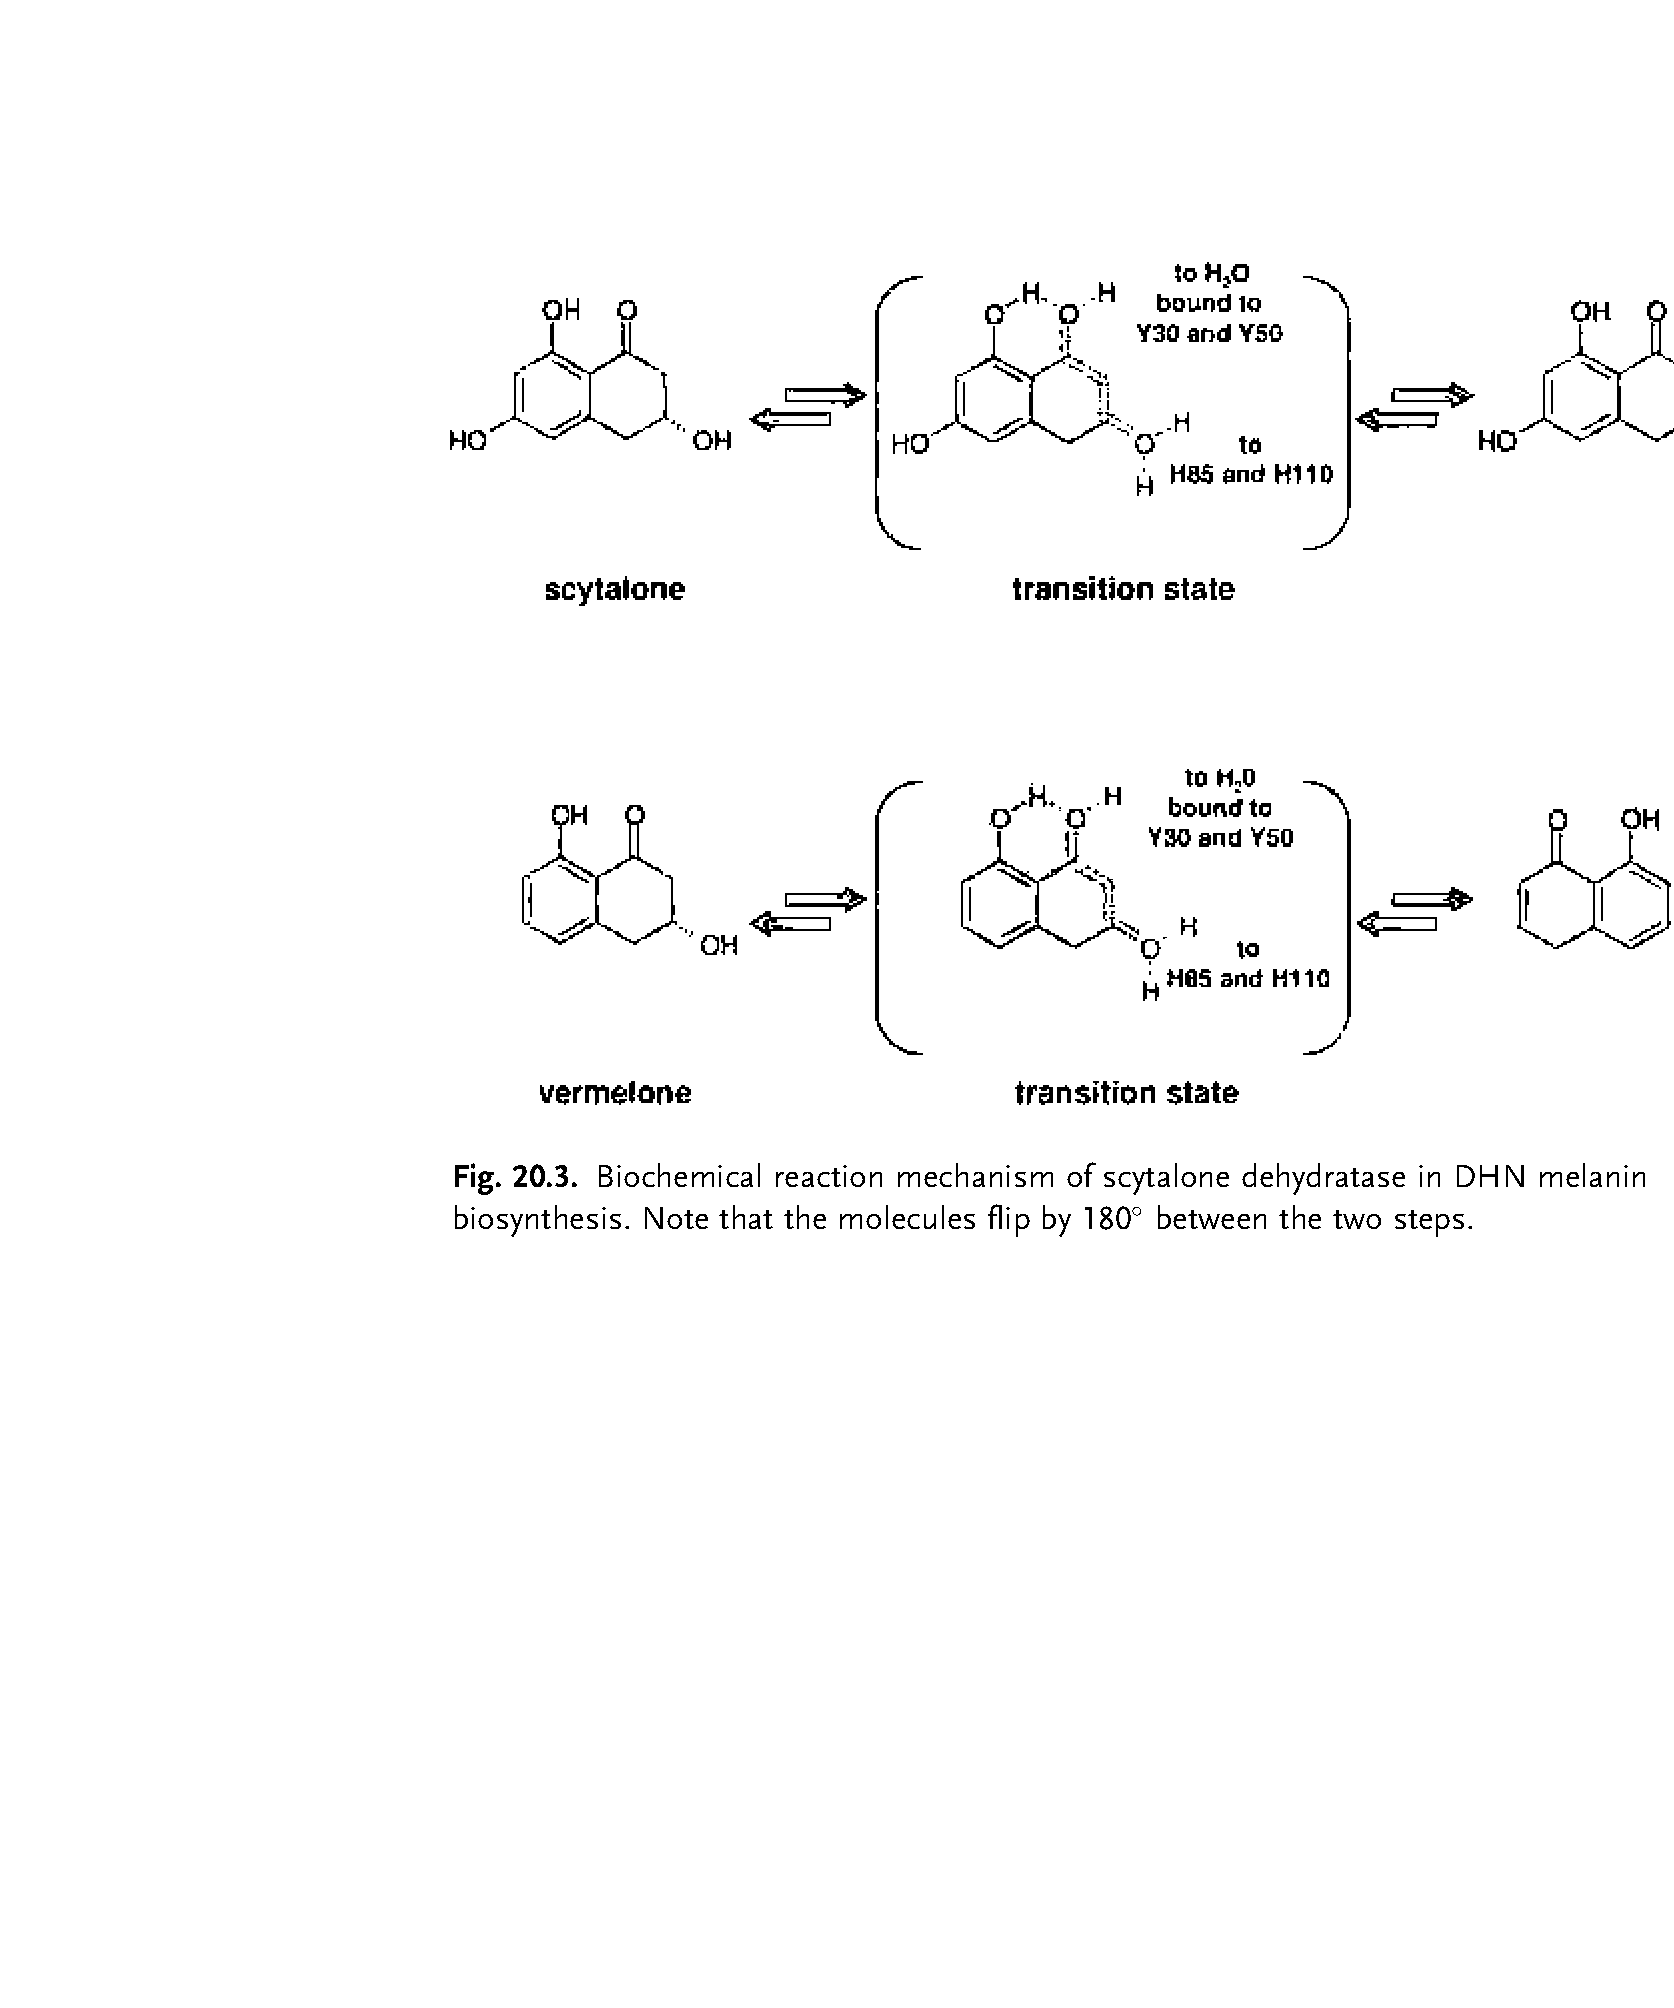 Fig. 20.3. Biochemical reaction mechanism of scytalone dehydratase in DHN melanin biosynthesis. Note that the molecules flip by 180° between the two steps.